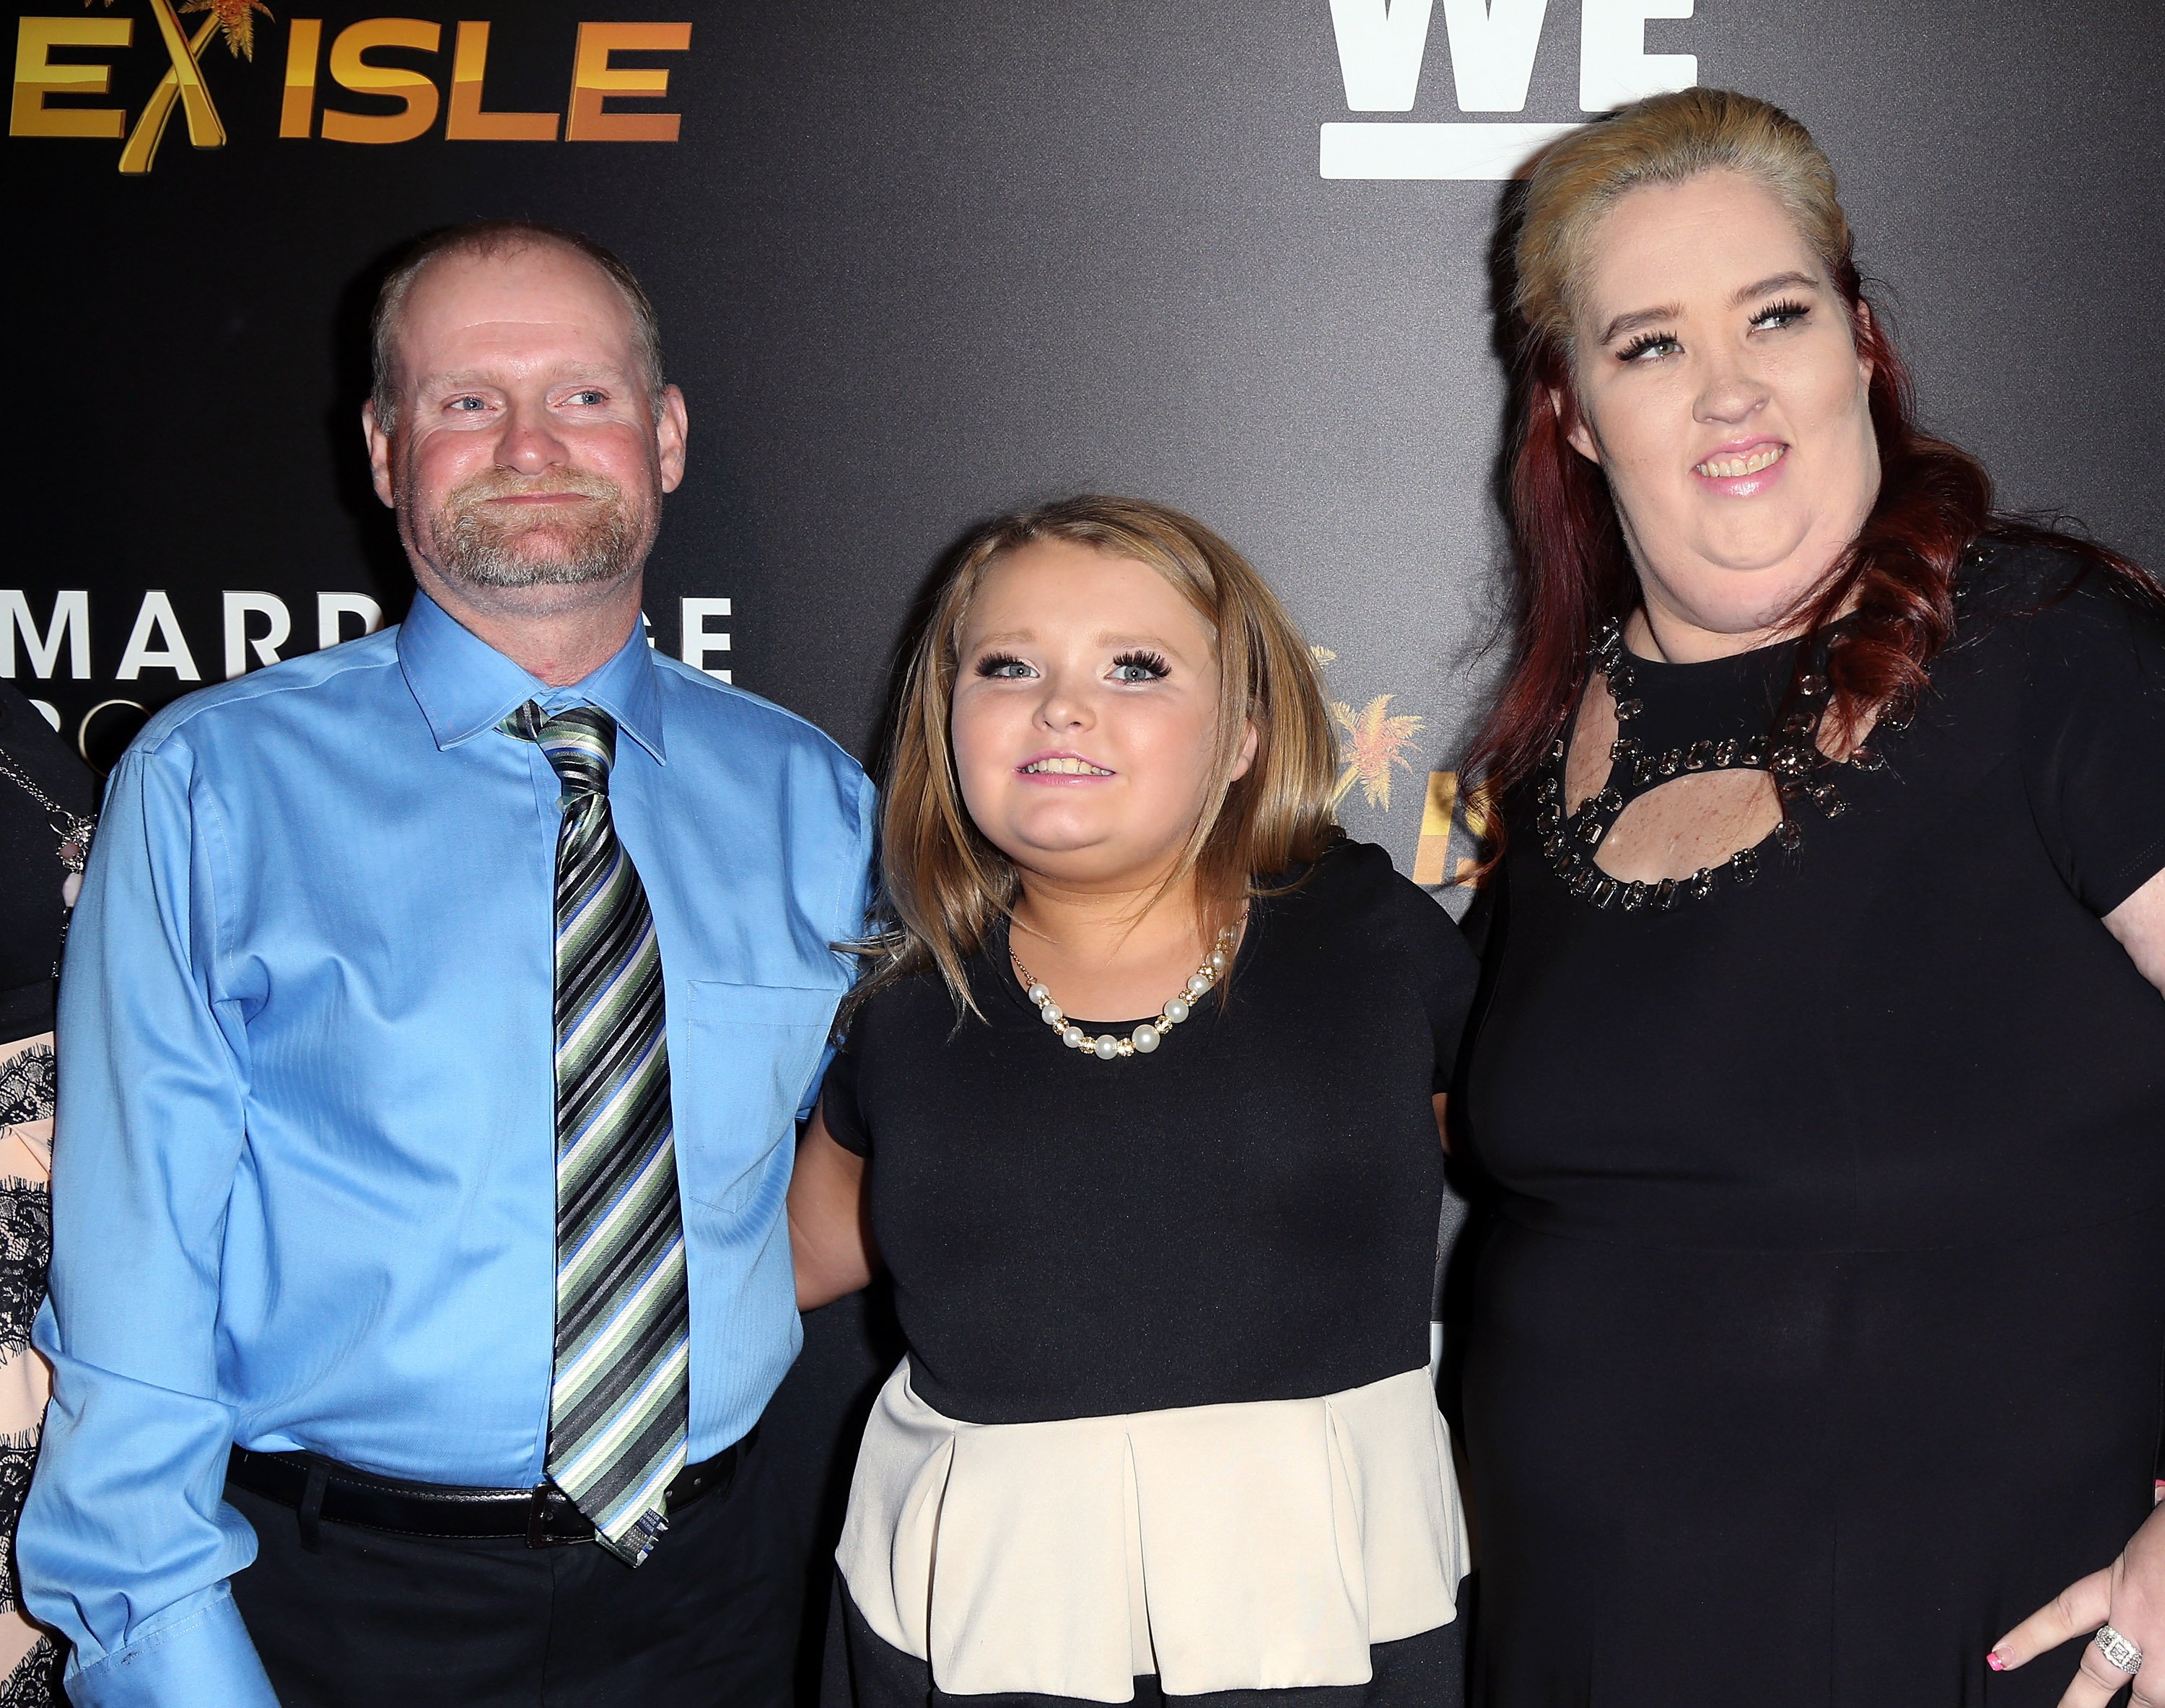 Mama June, Honey Boo Boo and Sugar Bear at the premiere of "Marriage Boot Camp" Reality Stars on November 19, 2015 | Photo: GettyImages